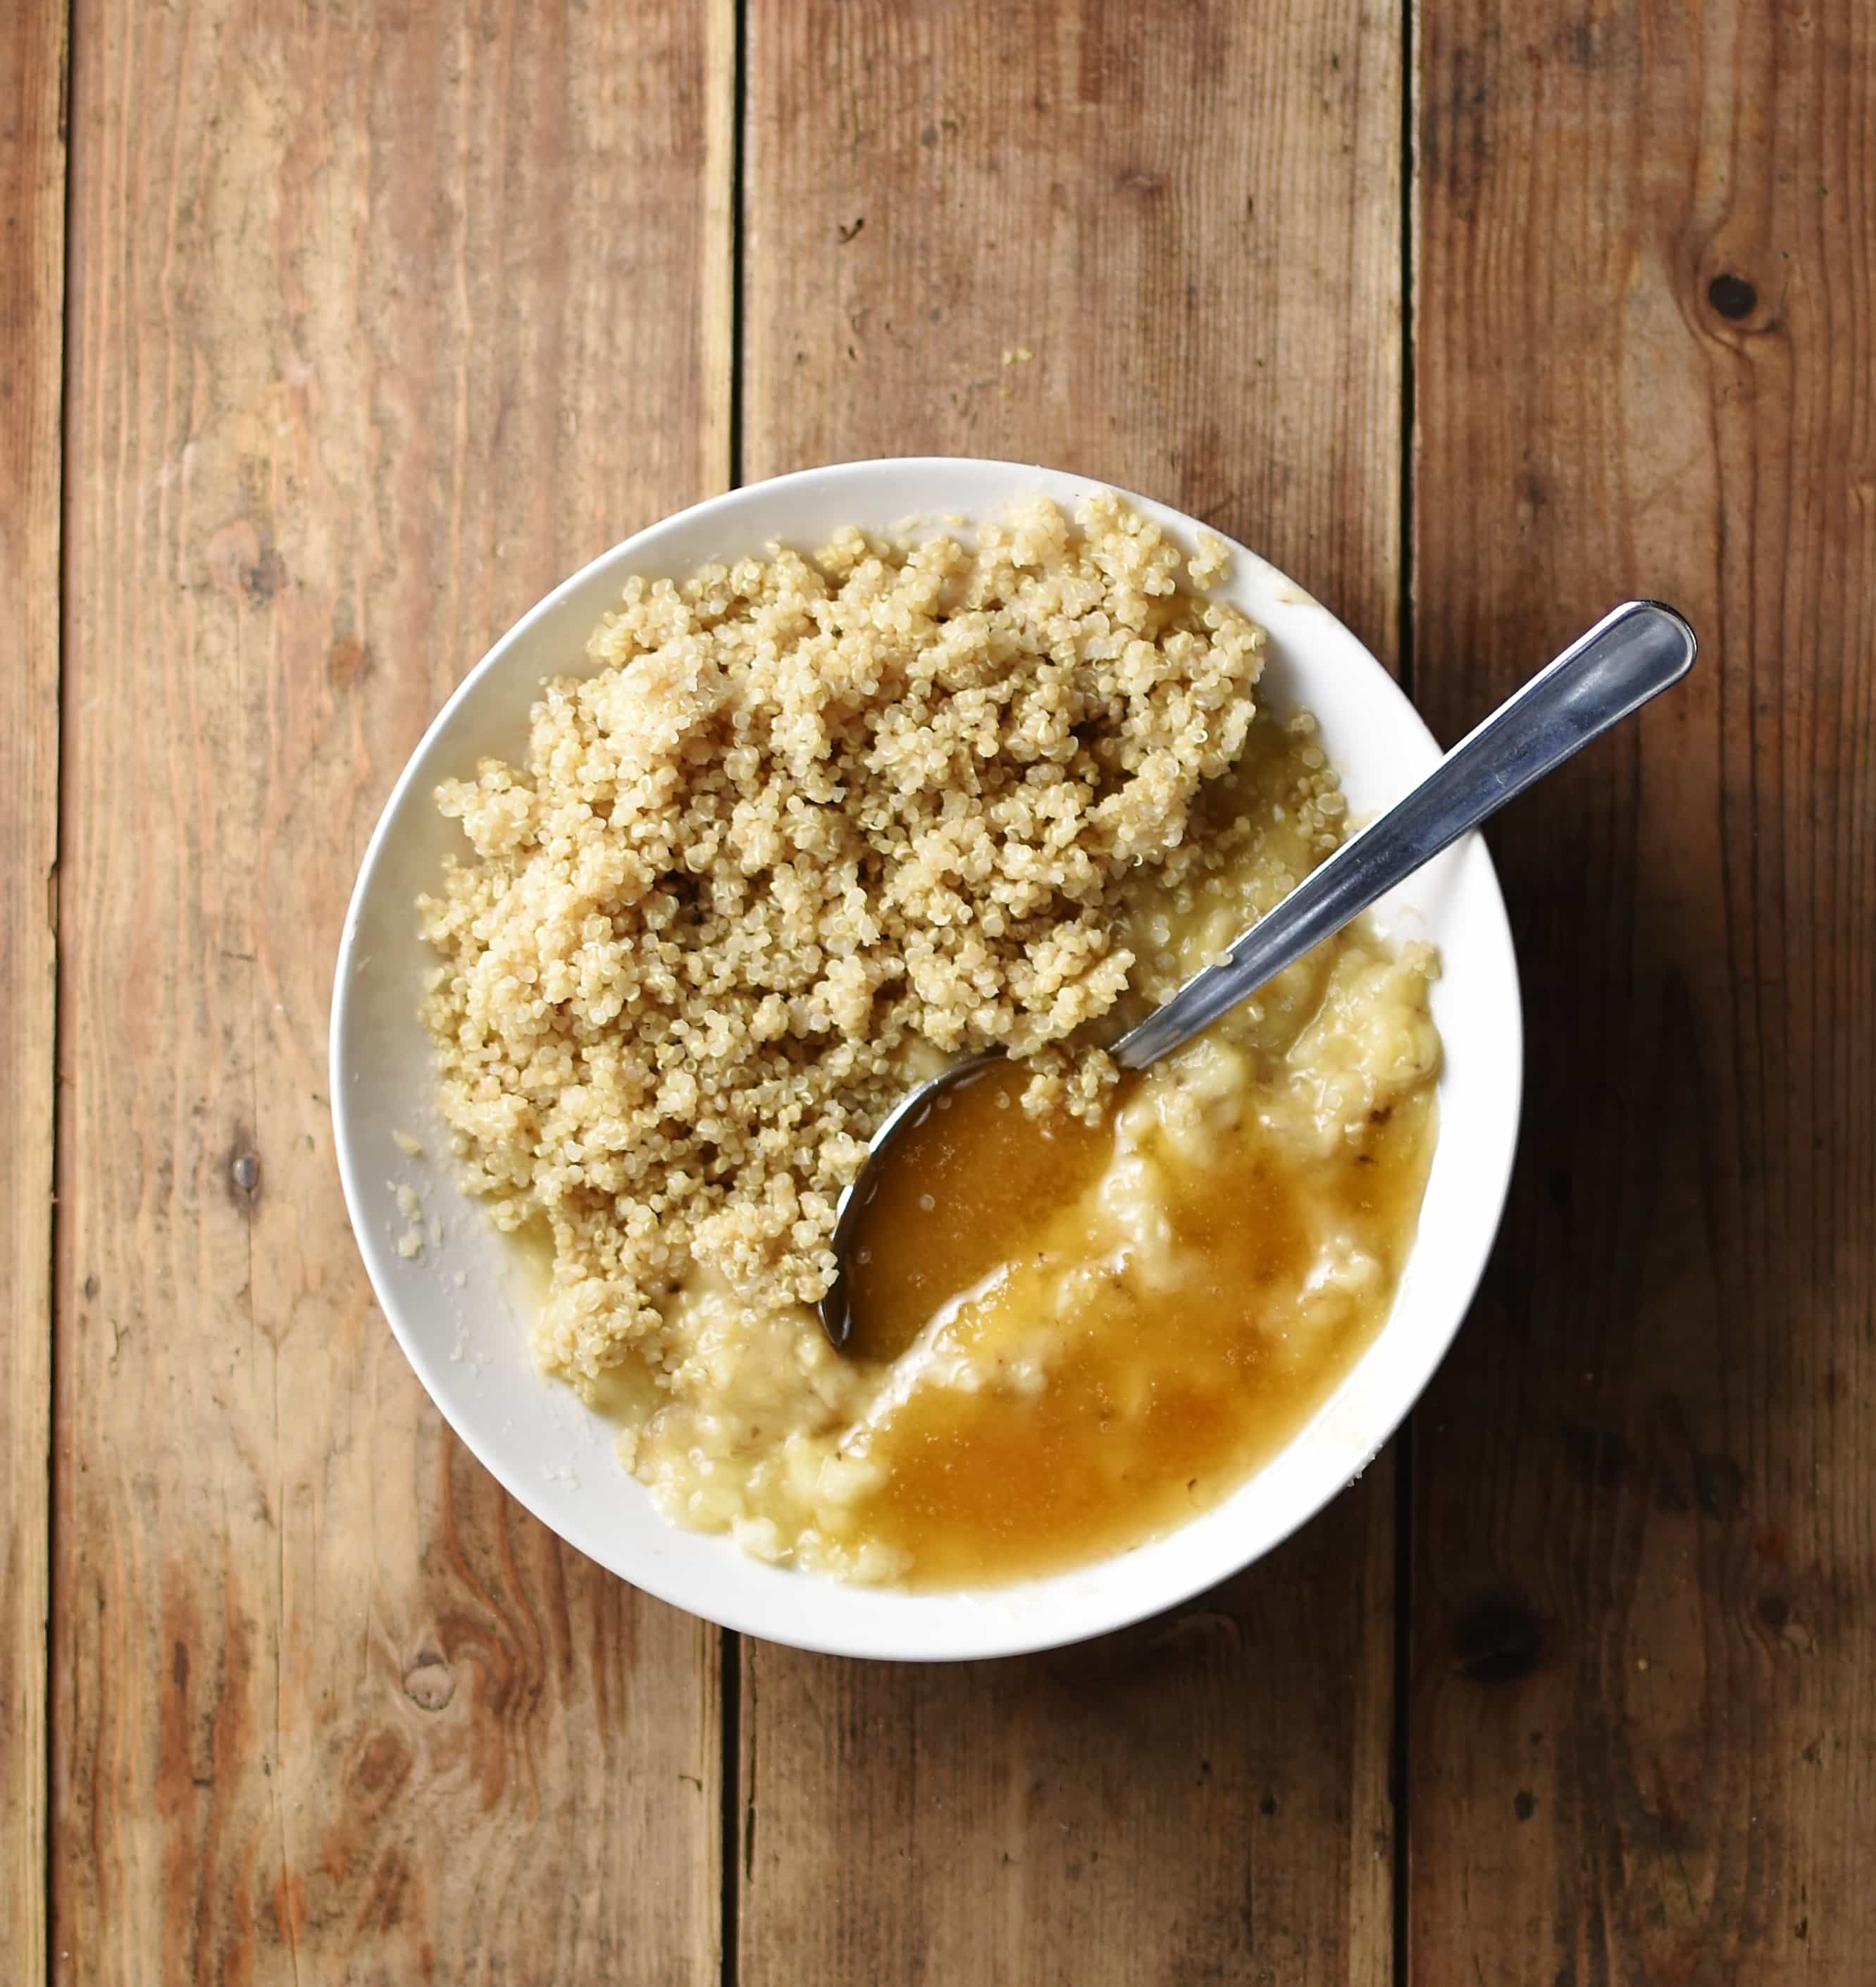 Cooked quinoa with mashed banana and honey in white bowl with spoon.